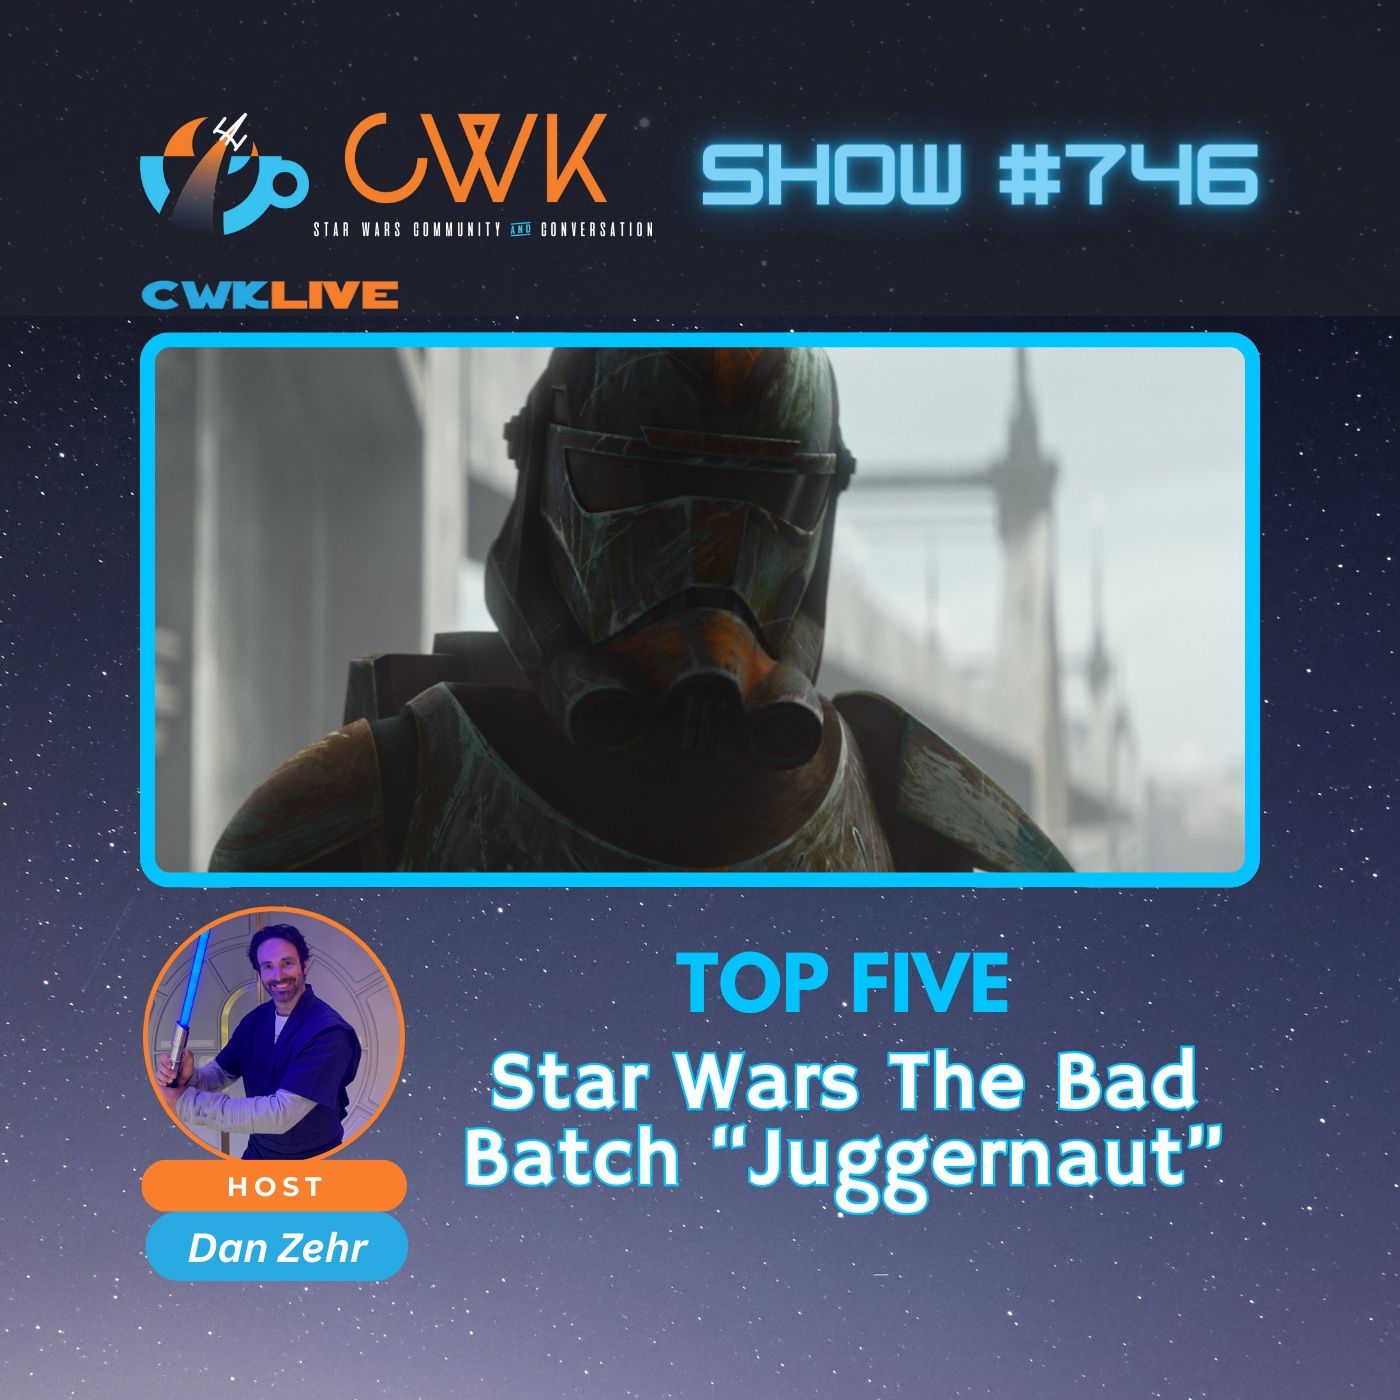 CWK Show #746 LIVE: Top Five Moments from The Bad Batch "Juggernaut"